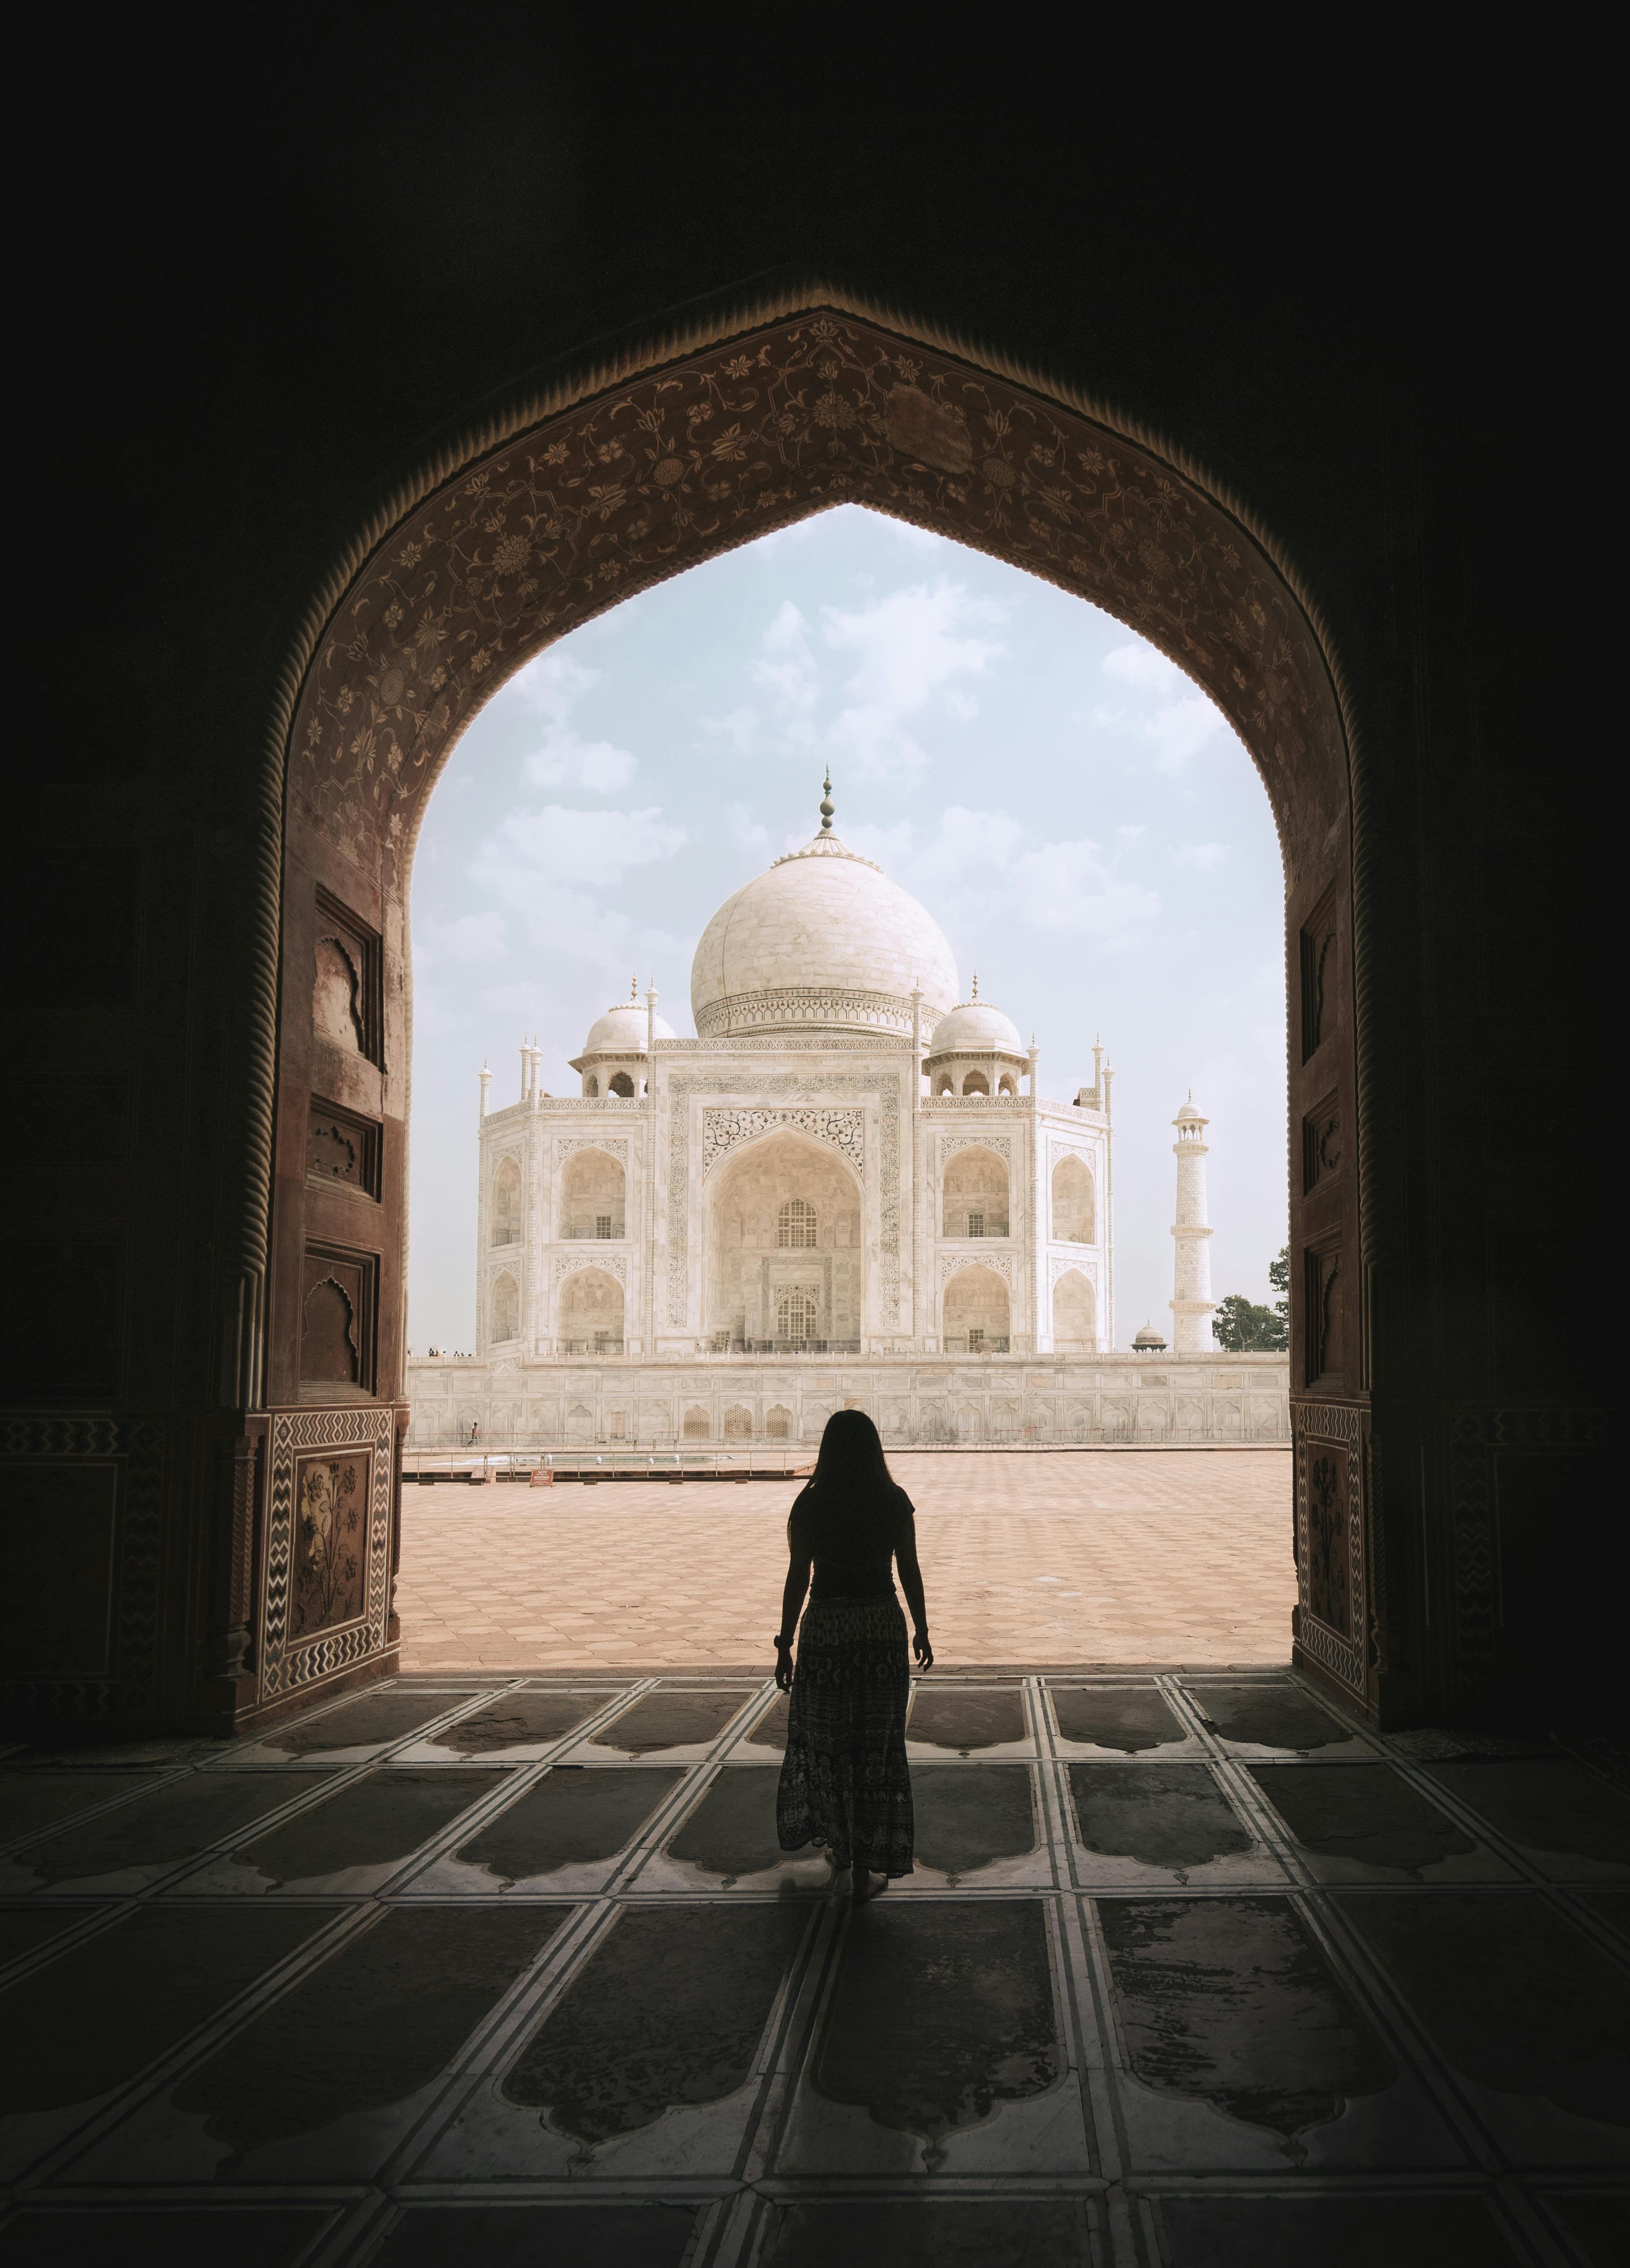 The Taj Mahal Is An Ivory White Marble Mausoleum On The South Bank Of The  Yamuna River In The Indian City Of Agra Hd Desktop Wallpaper 3840x2400 :  Wallpapers13.com